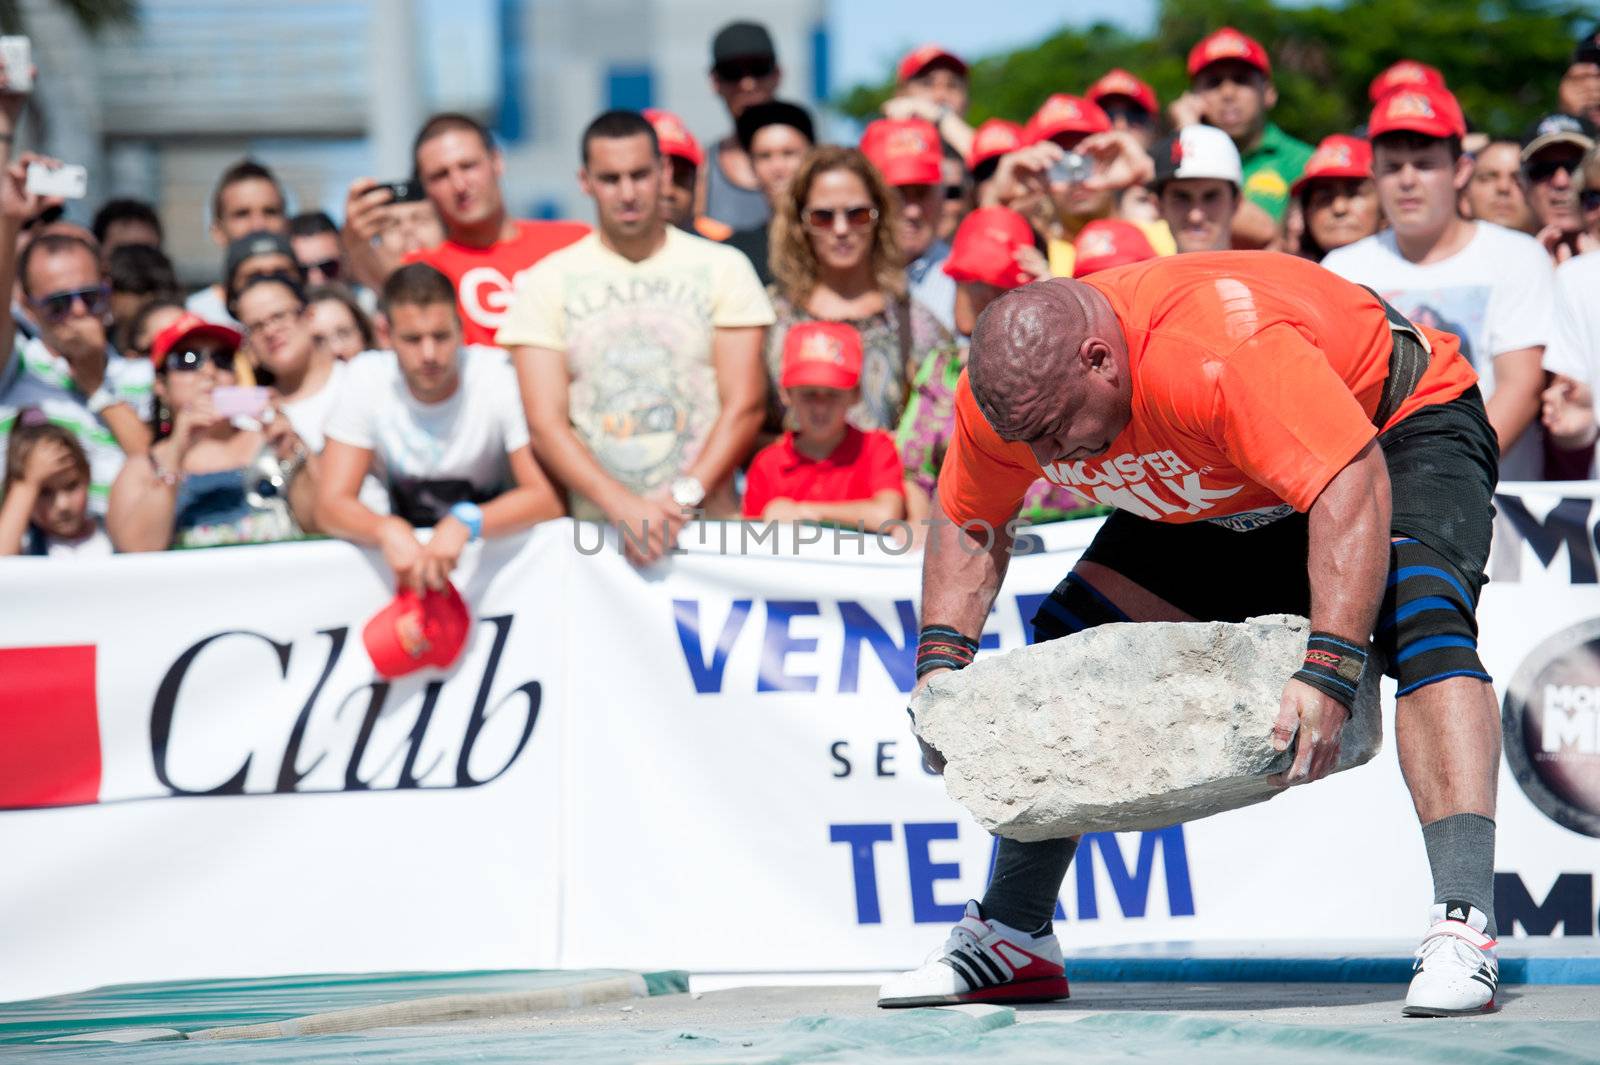 CANARY ISLANDS – SEPTEMBER 03: Ervin Katona from Serbia lifting a heavy stone during Strongman Champions League in Las Palmas September 03, 2011 in Canary Islands, Spain